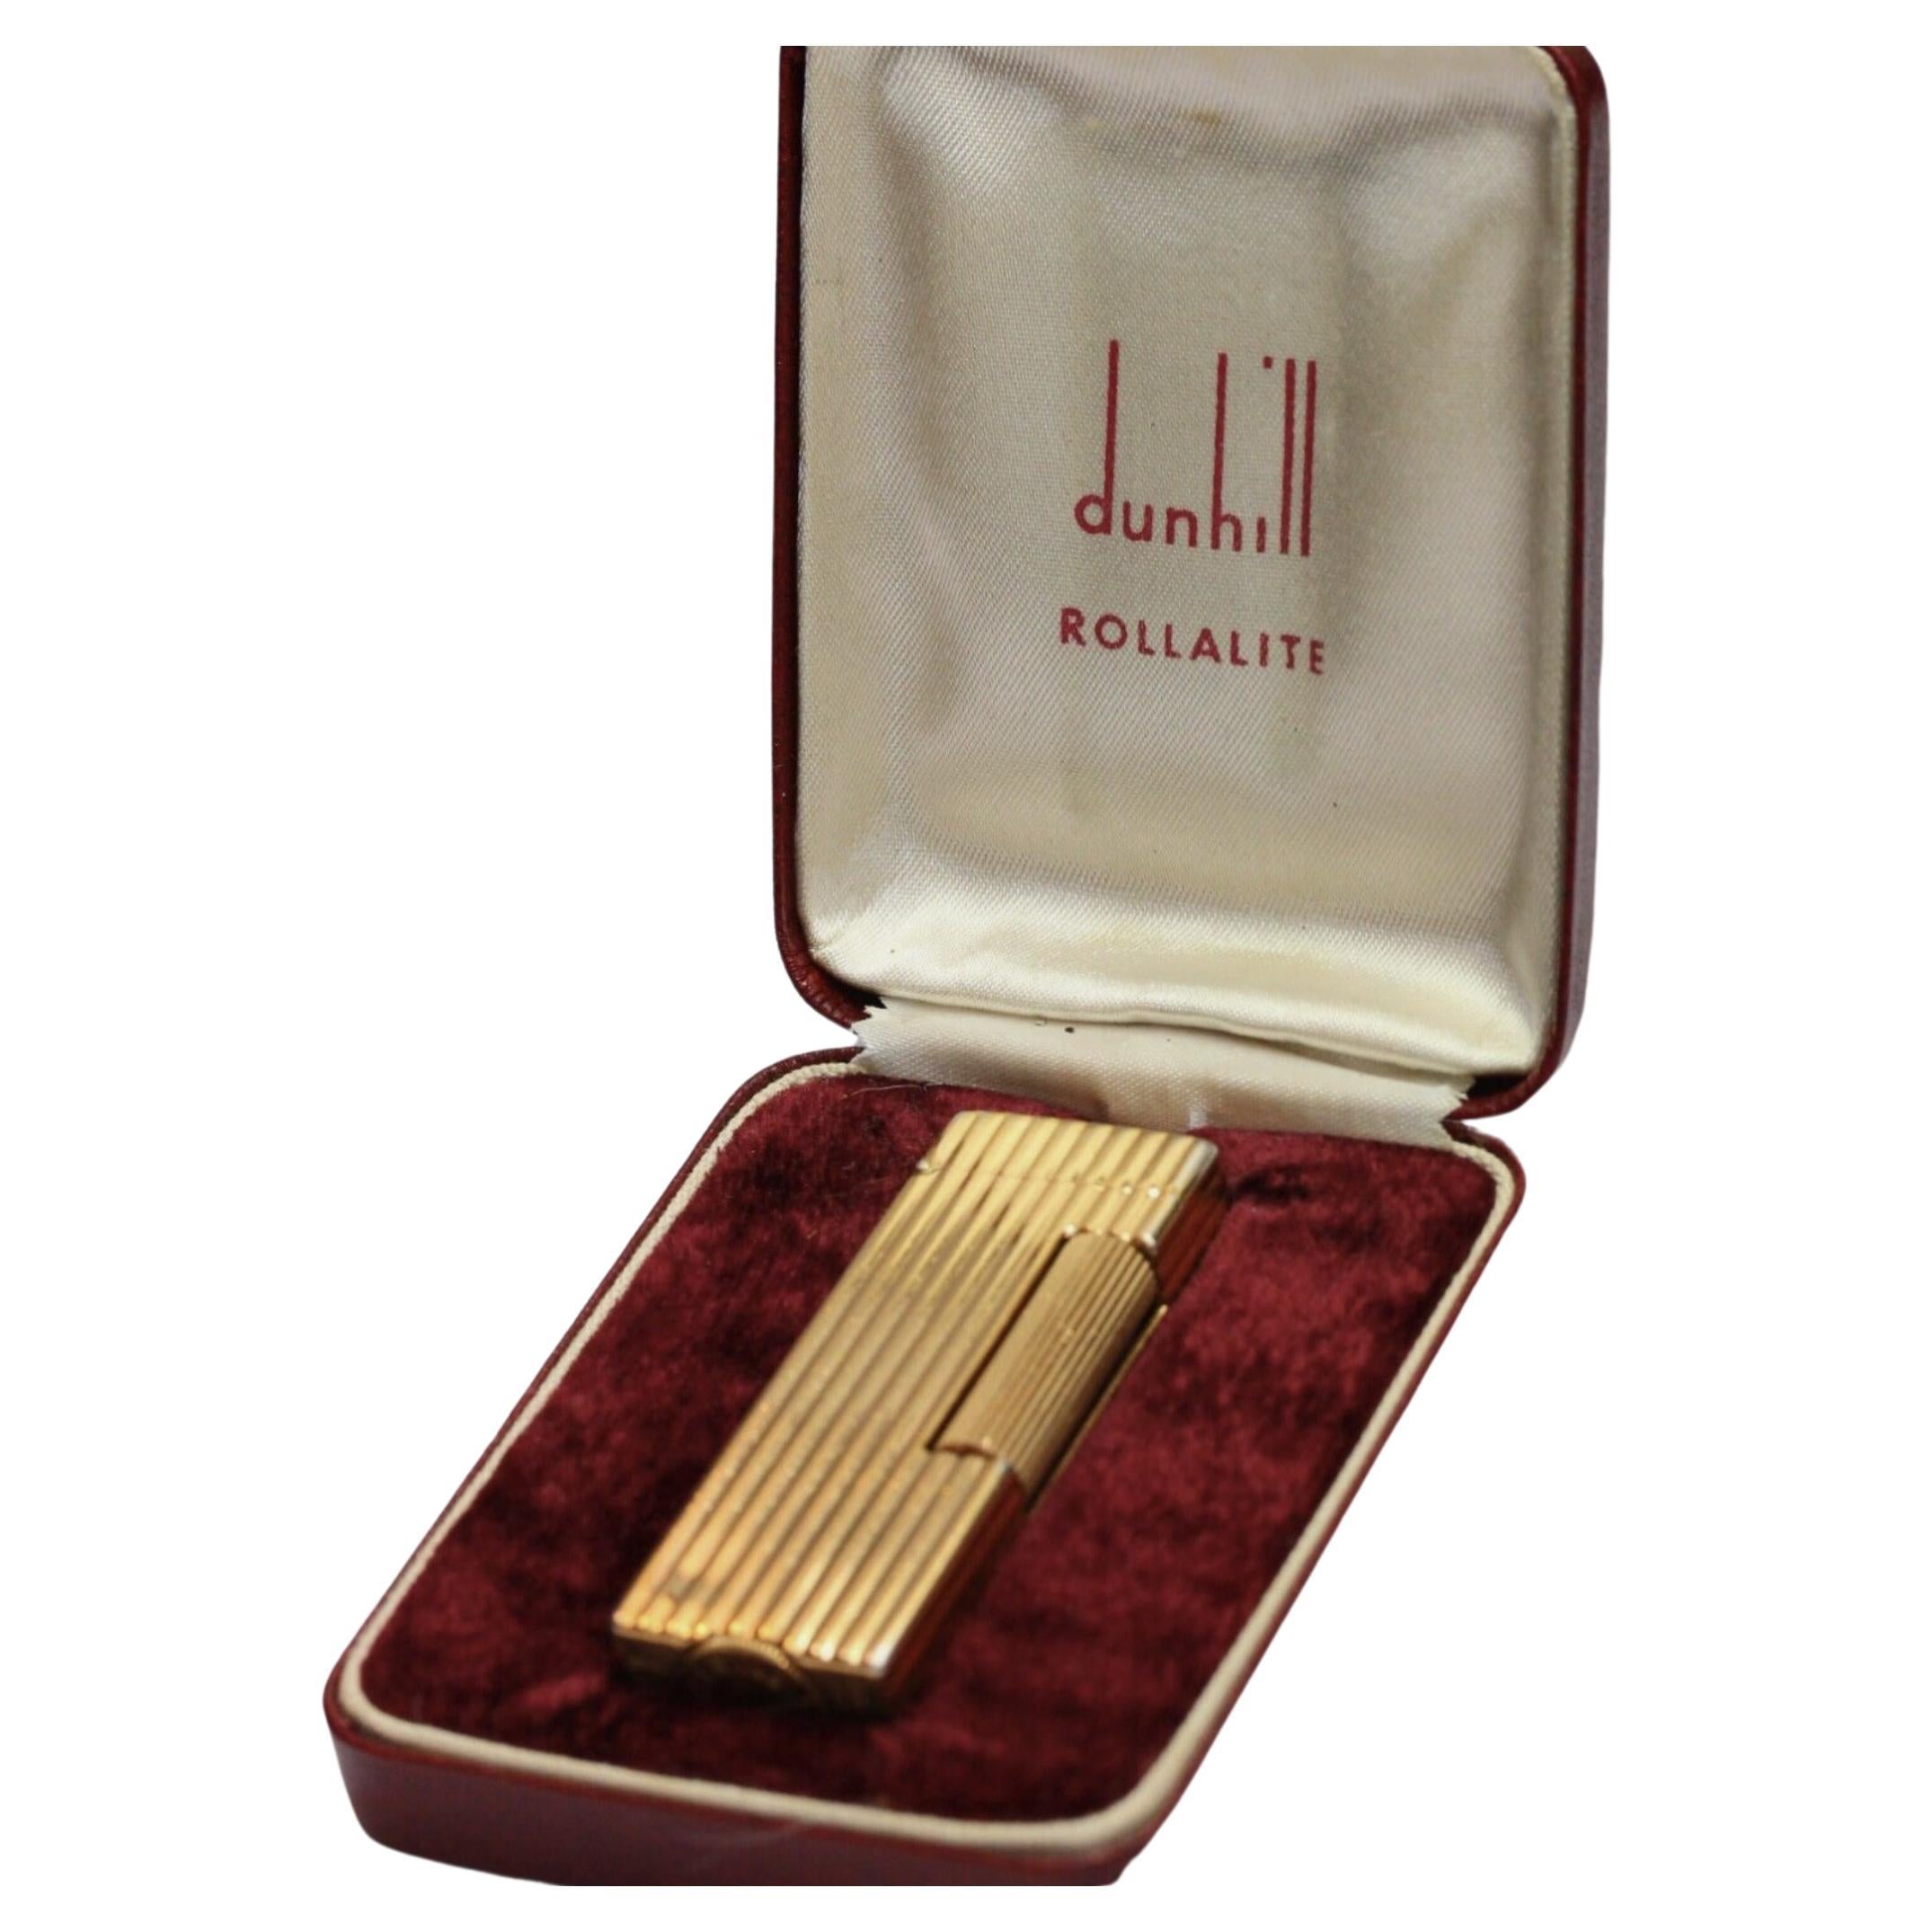 auto rollalite dunhill